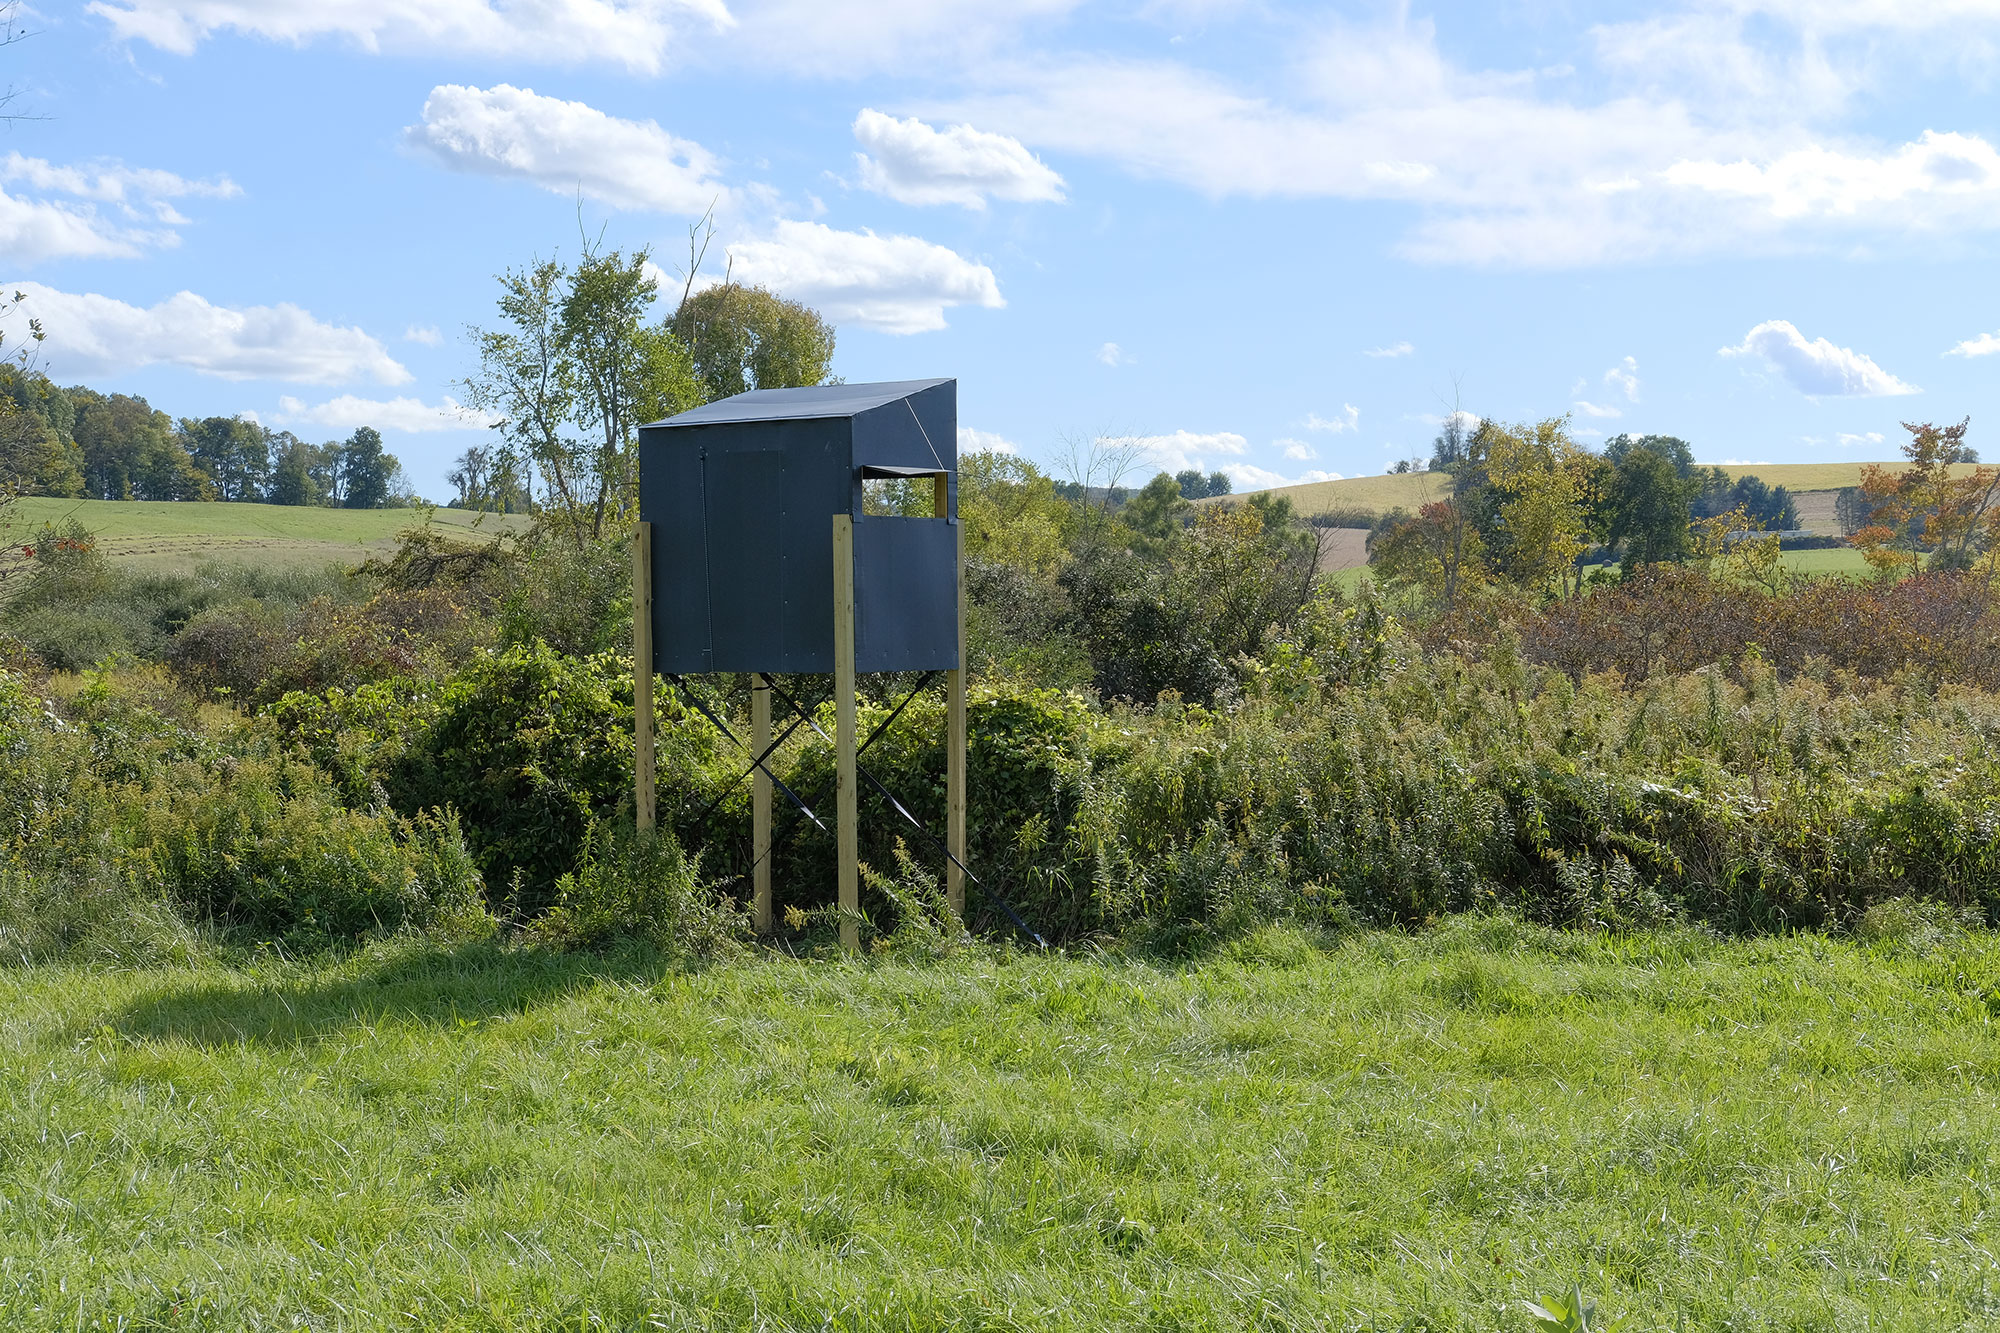 DJ Stand: Build a Customized, Portable, Elevated Deer Hunting Blind for About $500